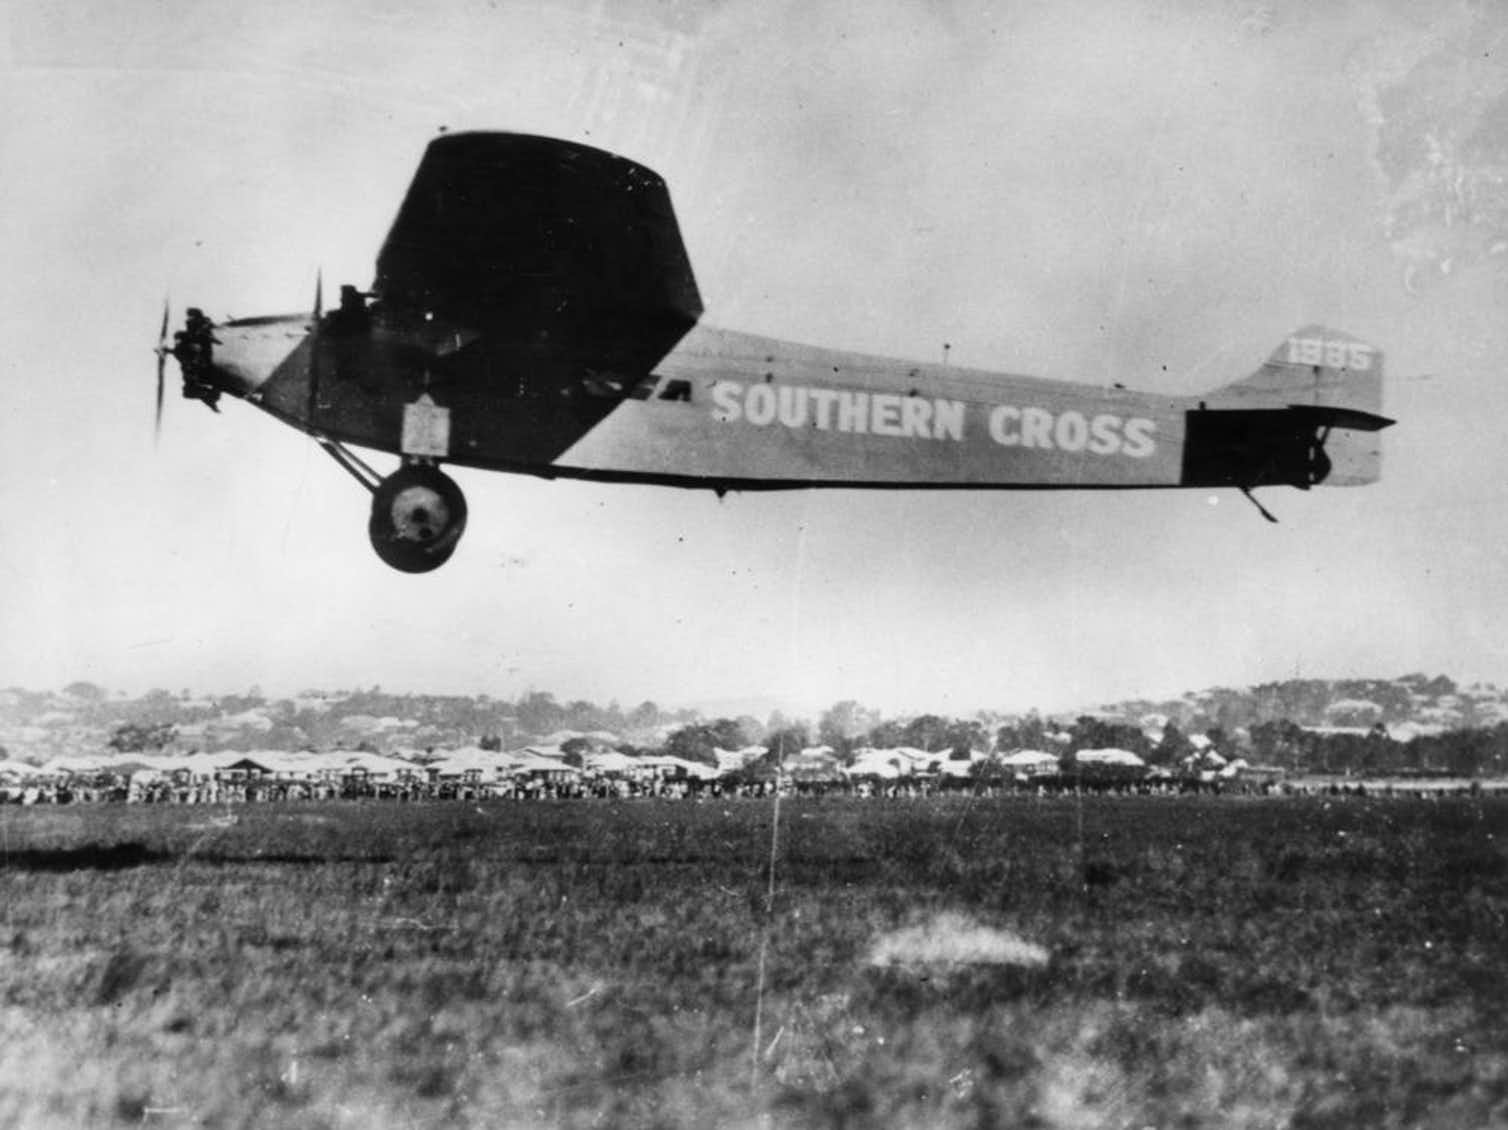 A black and white photo of a small plane with the text 'SOUTHERN CROSS' in white paint